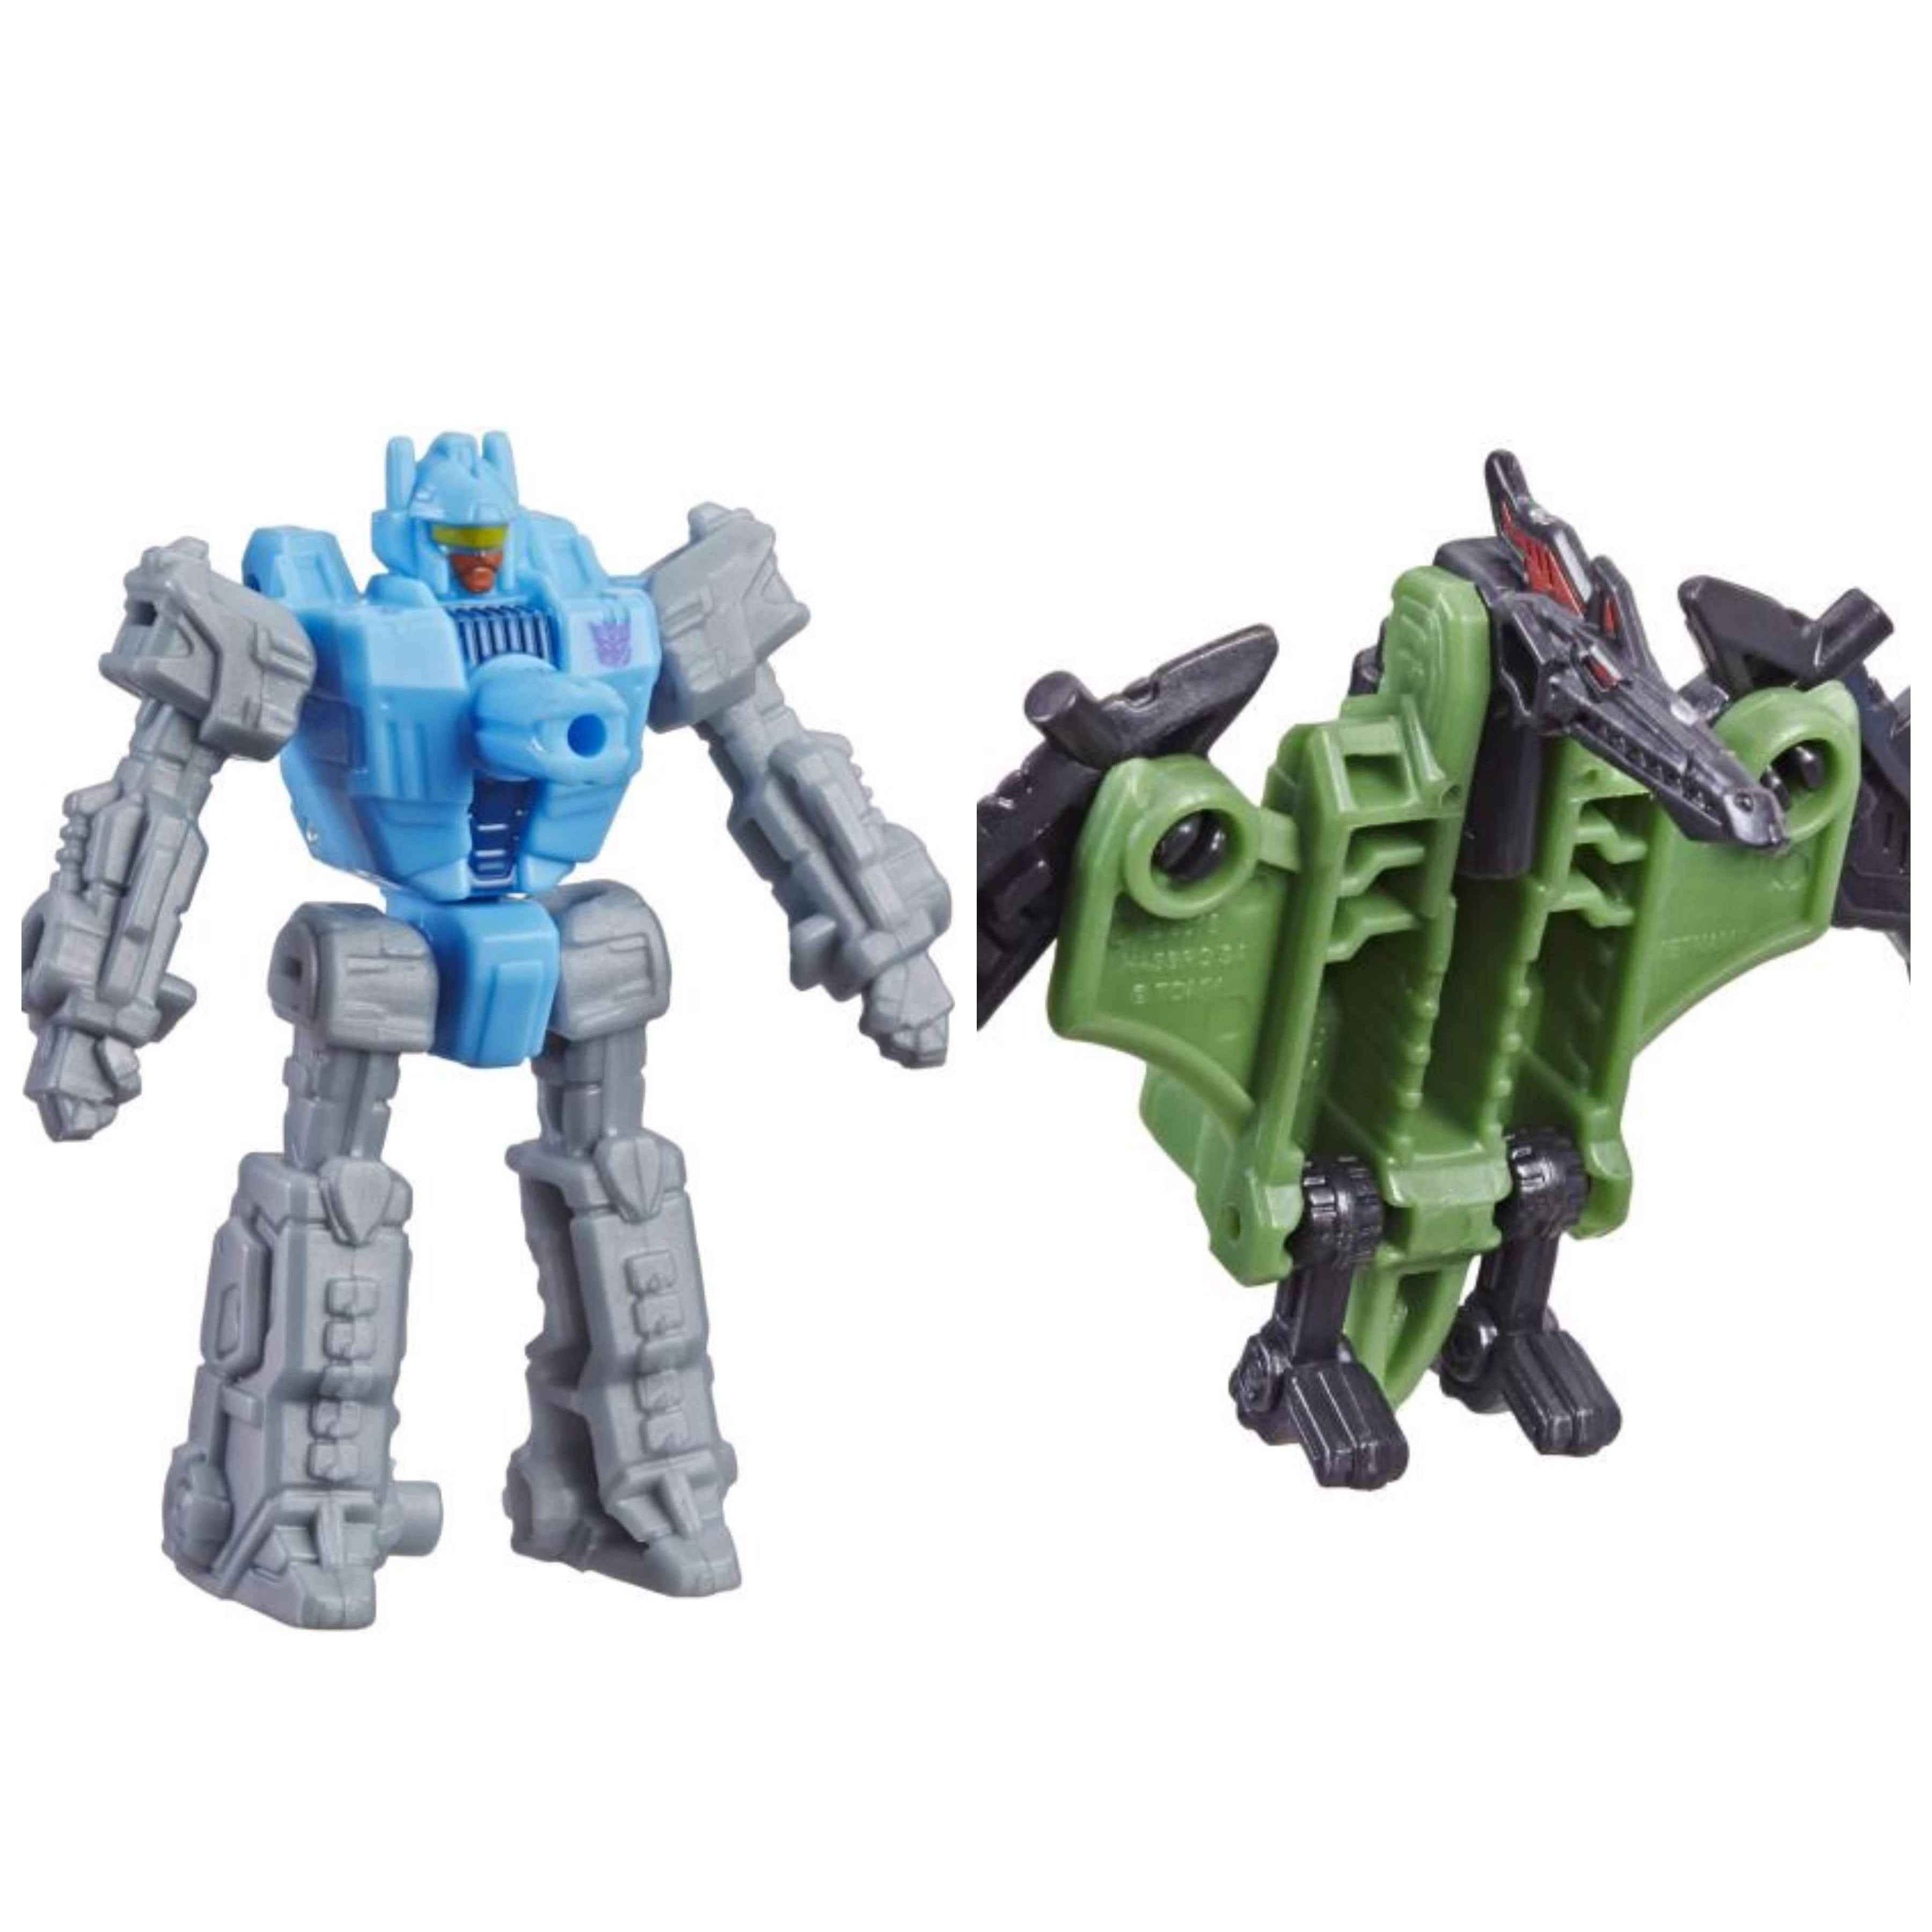 Image of Transformers War for Cybertron: Siege Battle Masters Wave 2 Set of 2 Figures